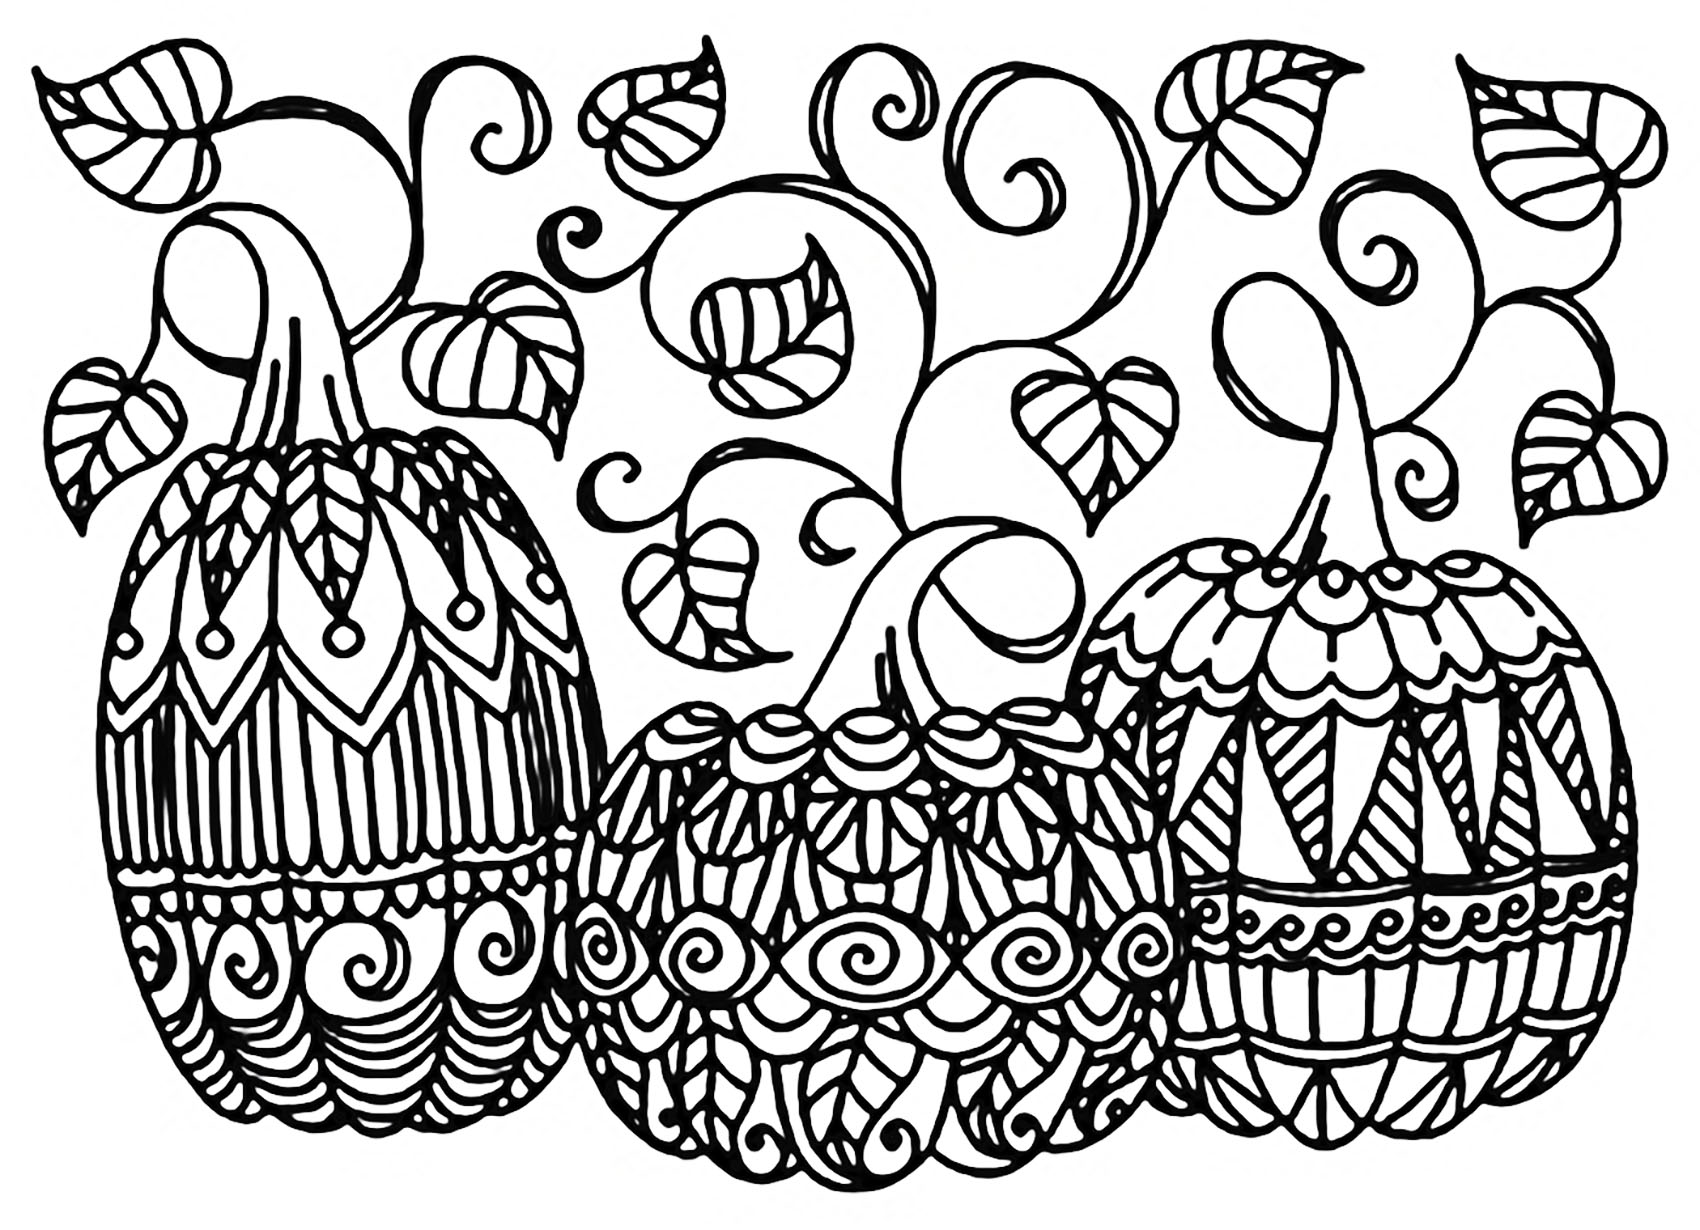 Halloween Coloring Pages For Adults at GetDrawings | Free download